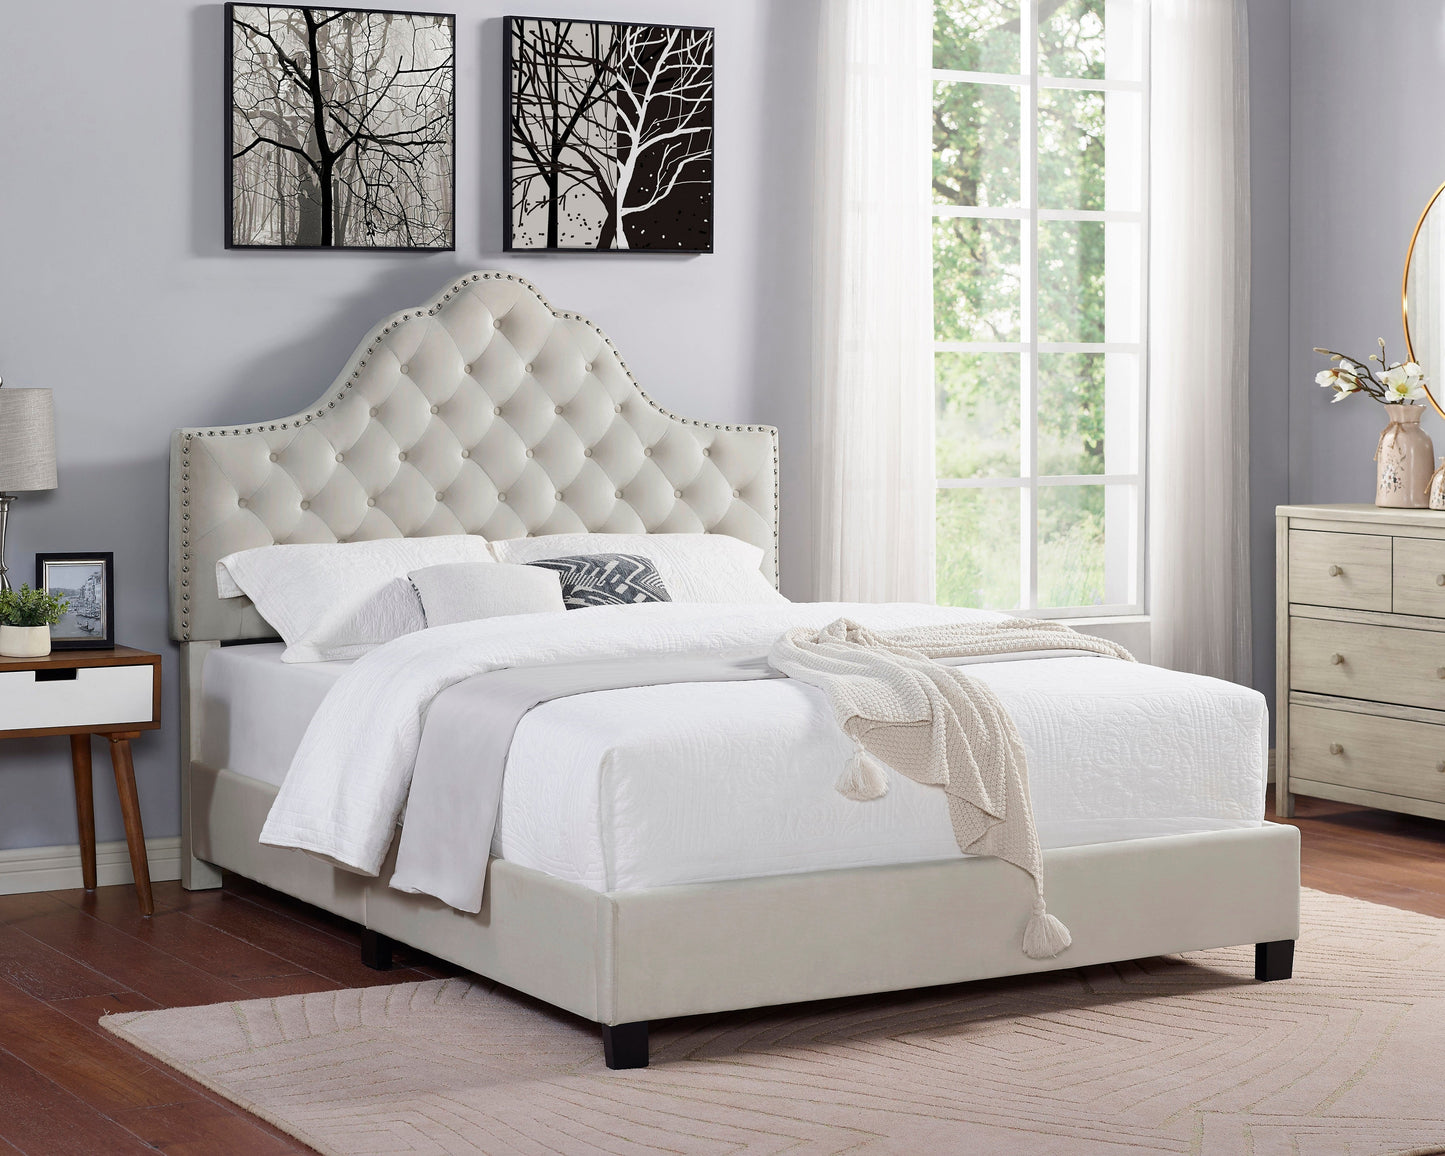 Floris Portman Style Diamond Tufted Upholstered Bed with Nailhead in Tan